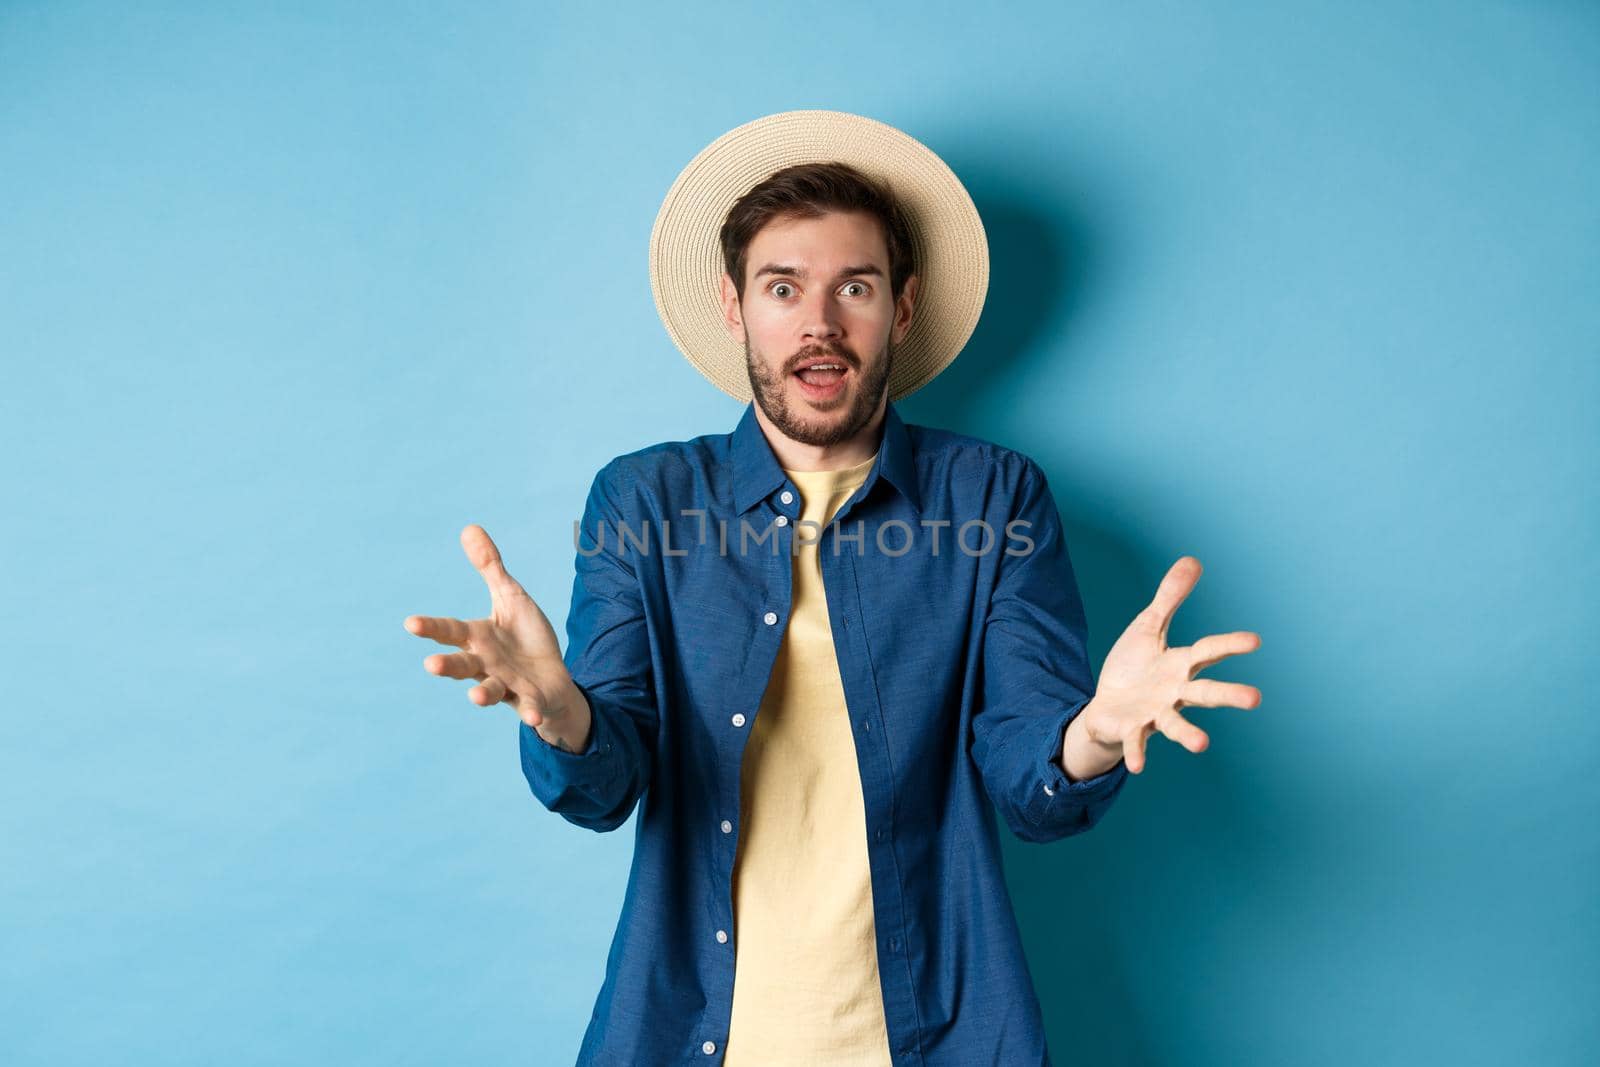 Surprised young man in summer hat, raising hands up staring with disbelief and amazement at camera, impressed with big event, standing on blue background.